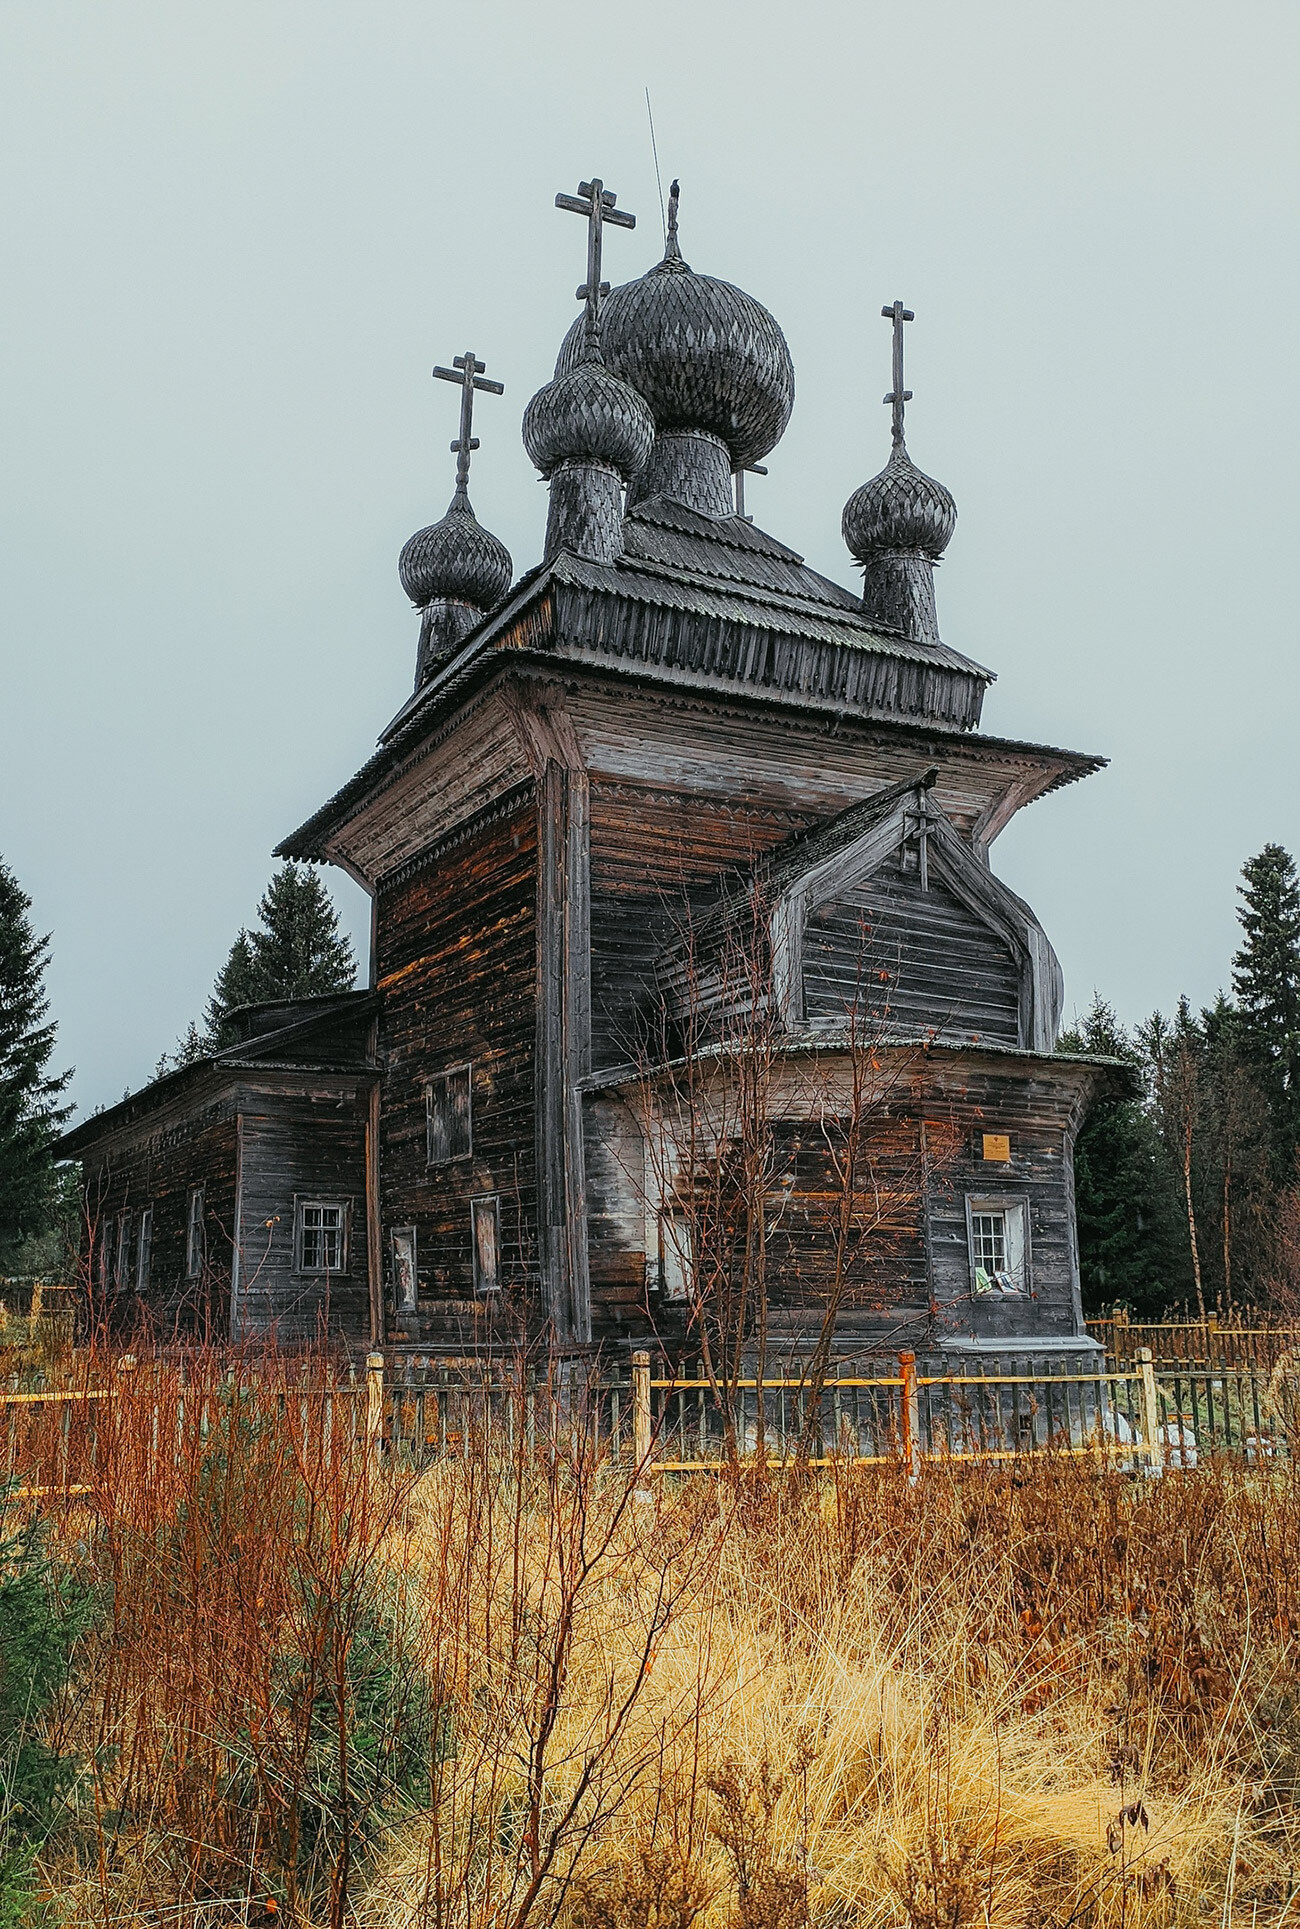 This church built in mid-XVIII century is located in the village of Virma, Karelia.